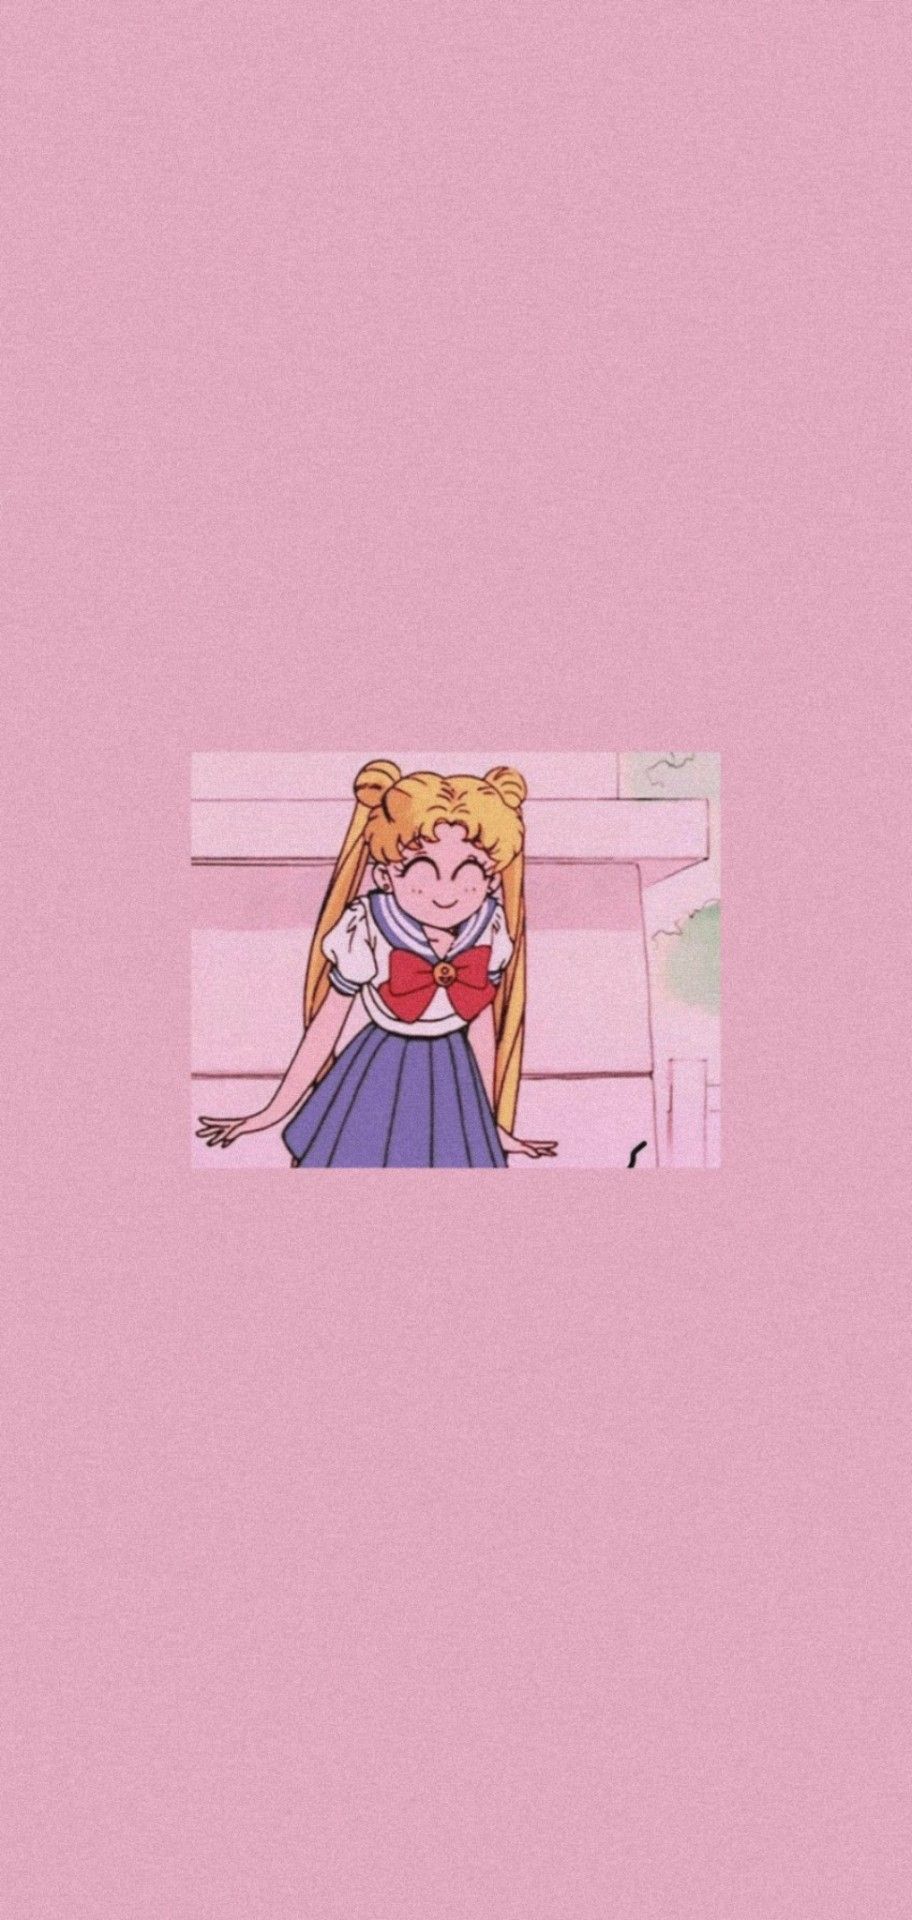 Free download wallpaper sailor moon Explore Posts and Blogs Tumgir [912x1920] for your Desktop, Mobile & Tablet. Explore Sailor Moon 90s Wallpaper. Sailor Moon Wallpaper, Sailor Moon Background, Sailor Moon Background